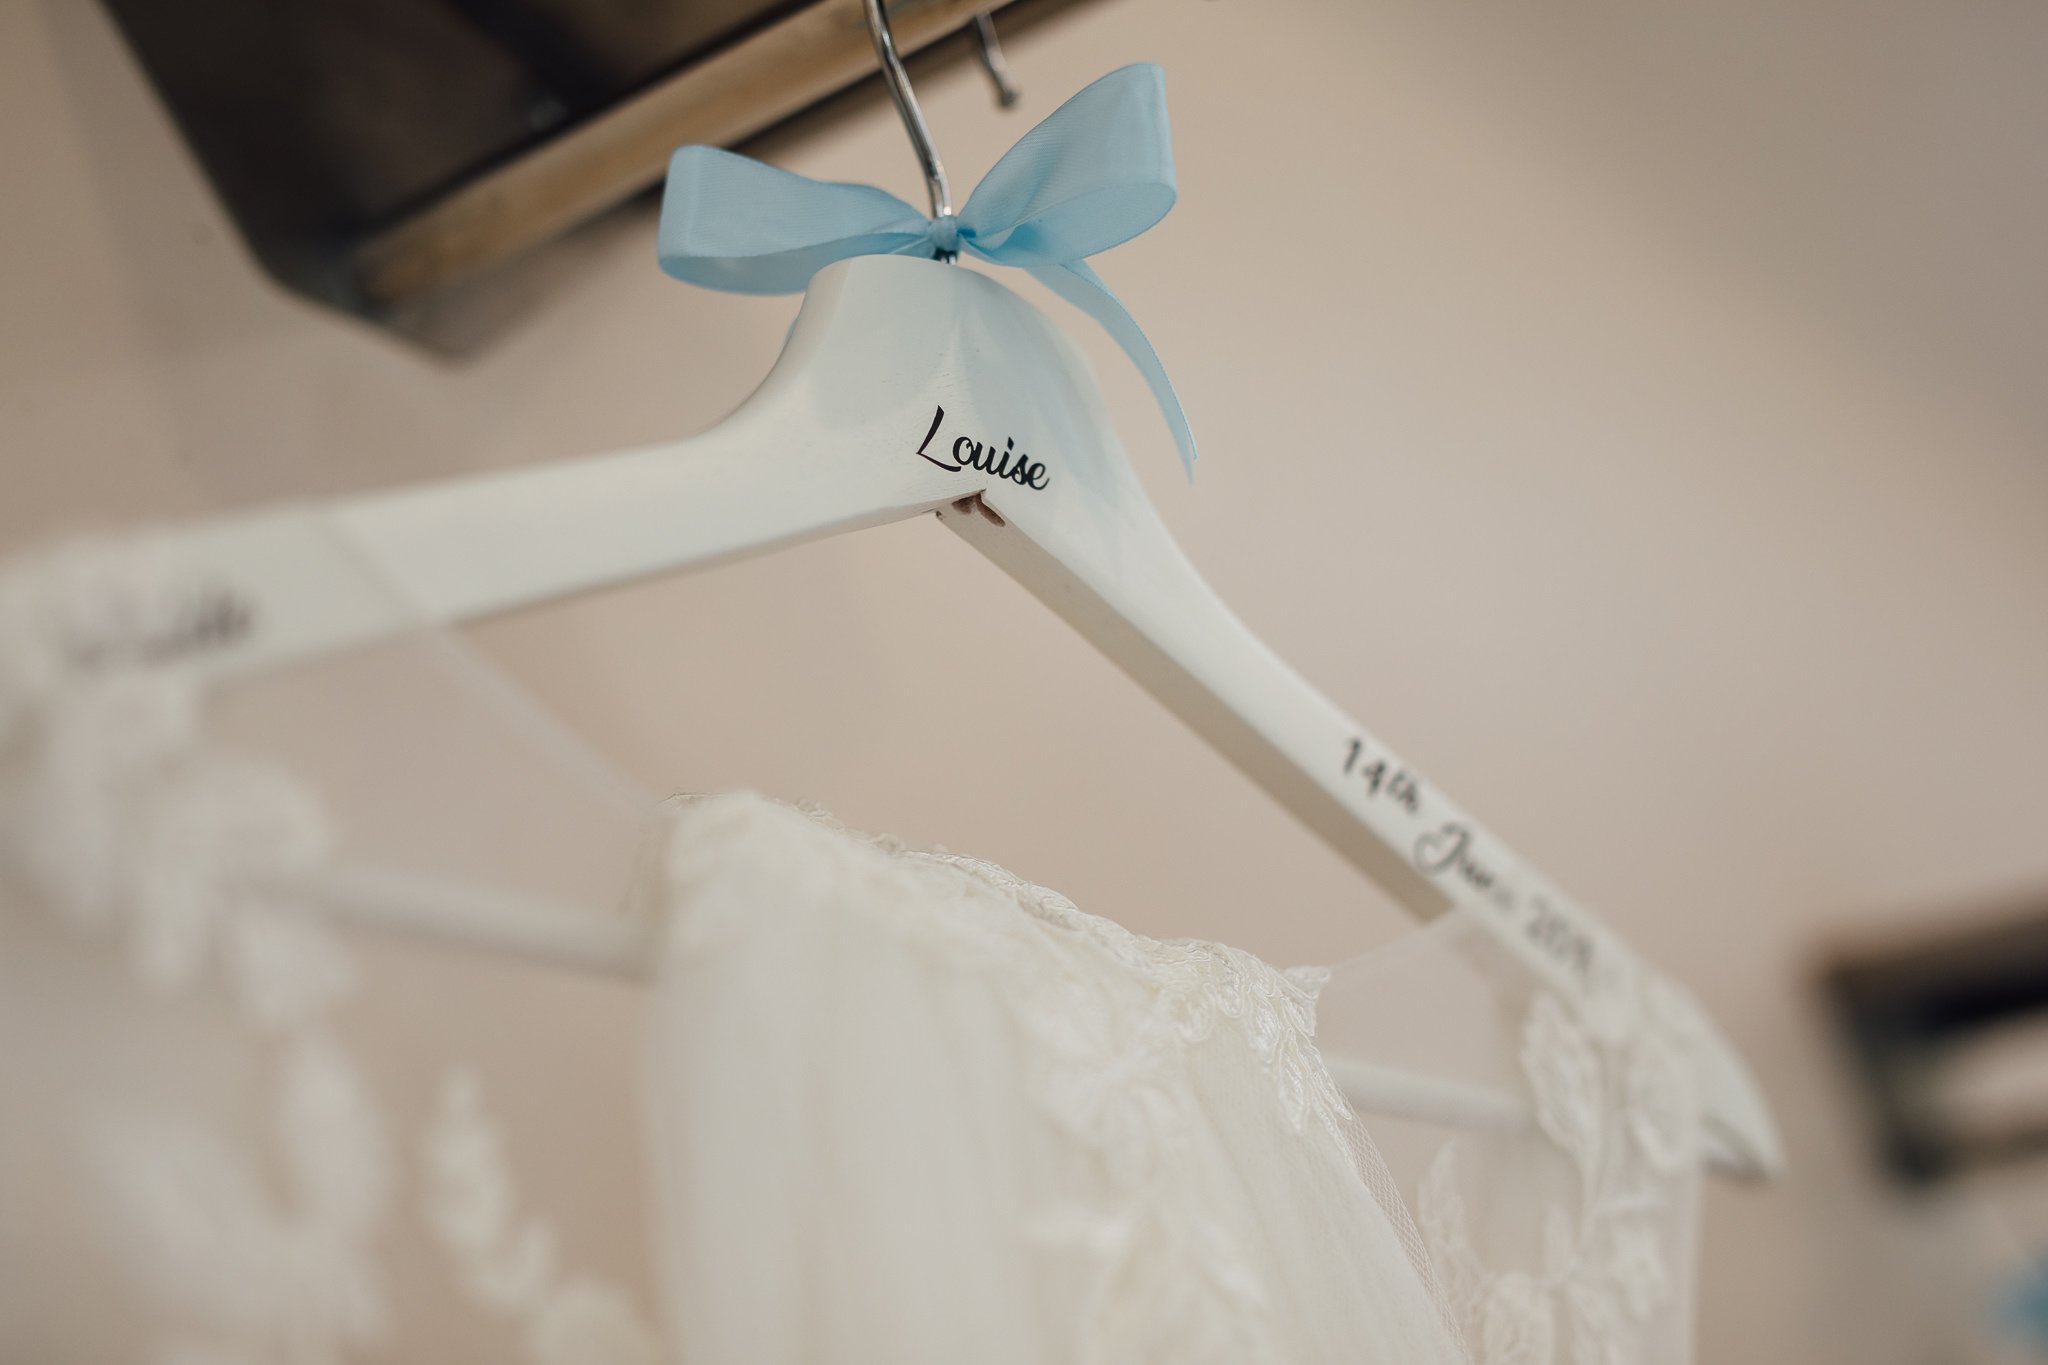  Dress hanger showing the name of the Bride 